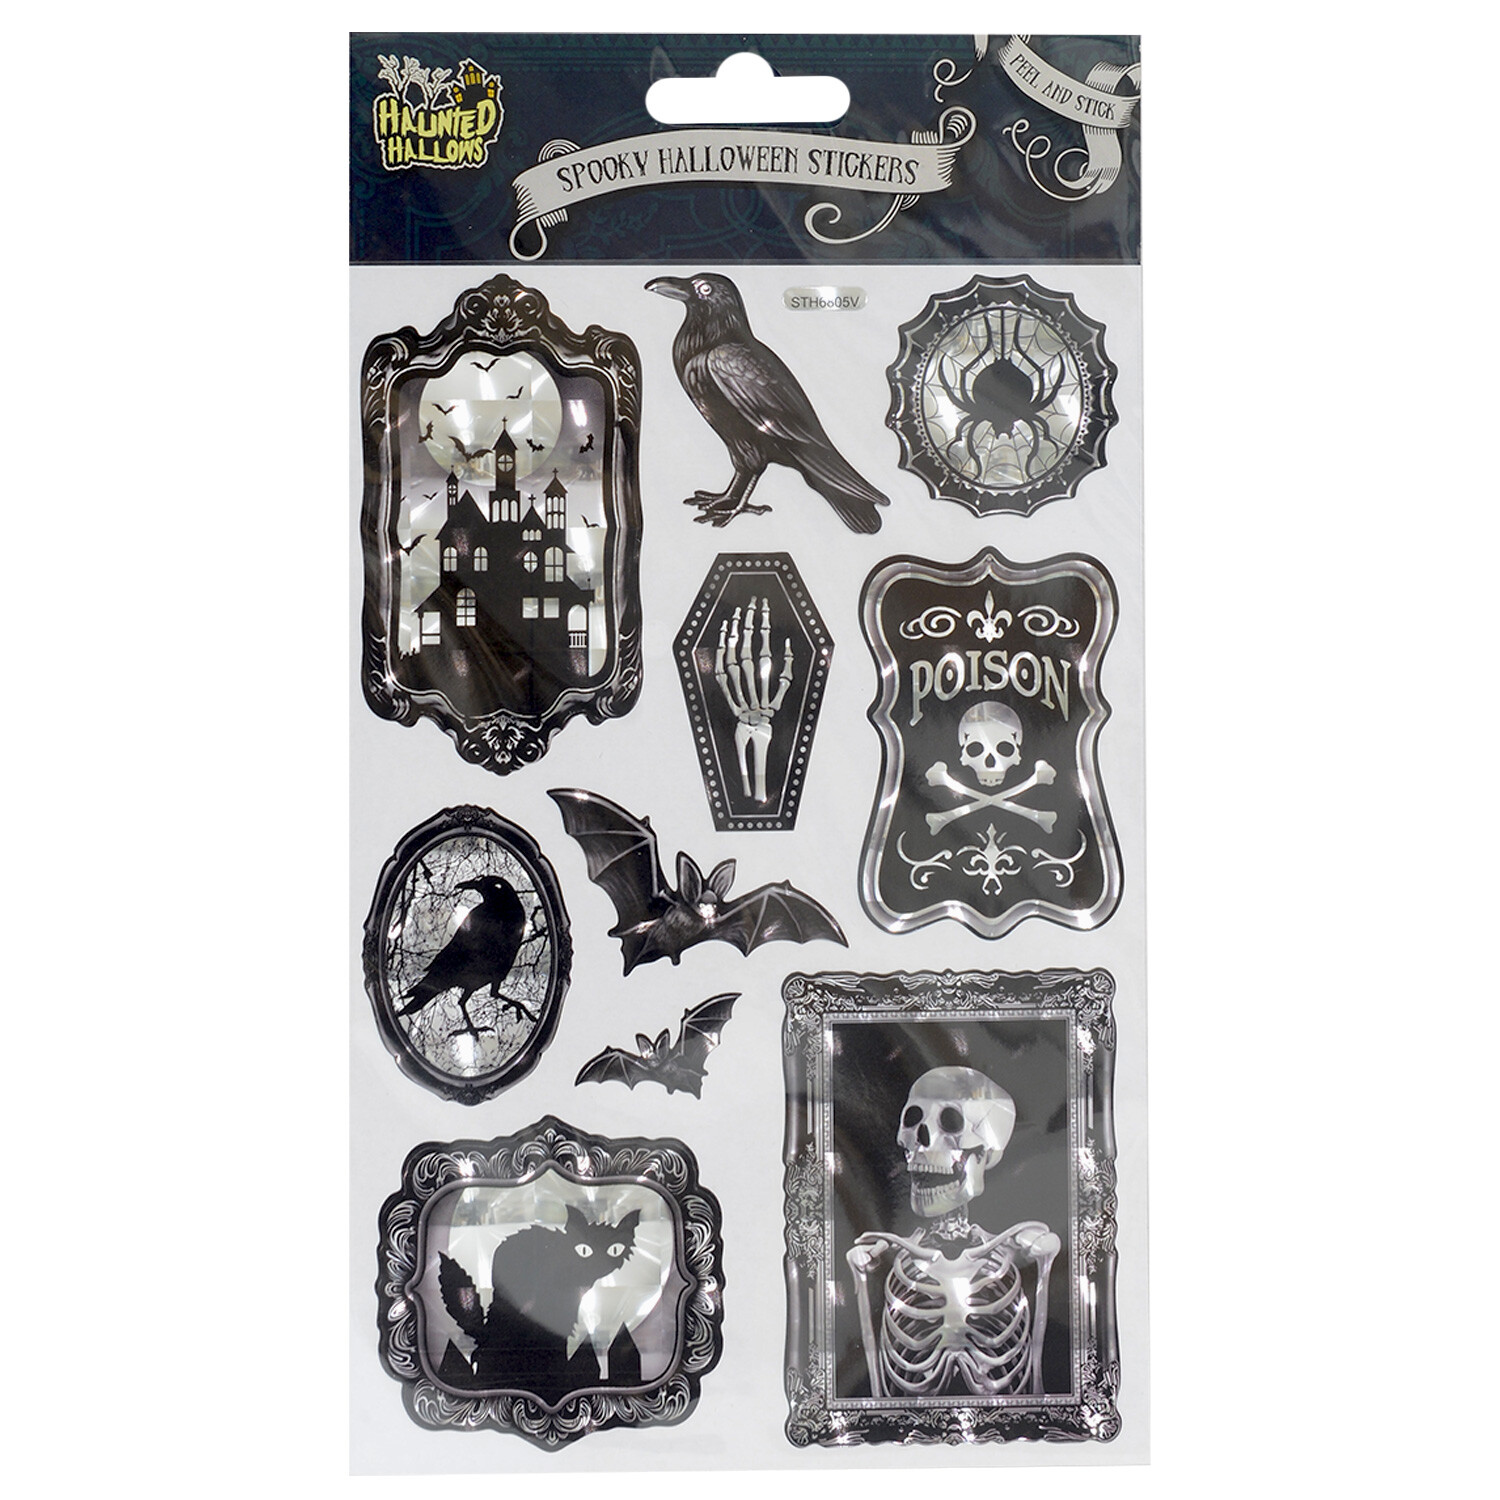 Haunted Hallows Spooky Halloween Stickers Image